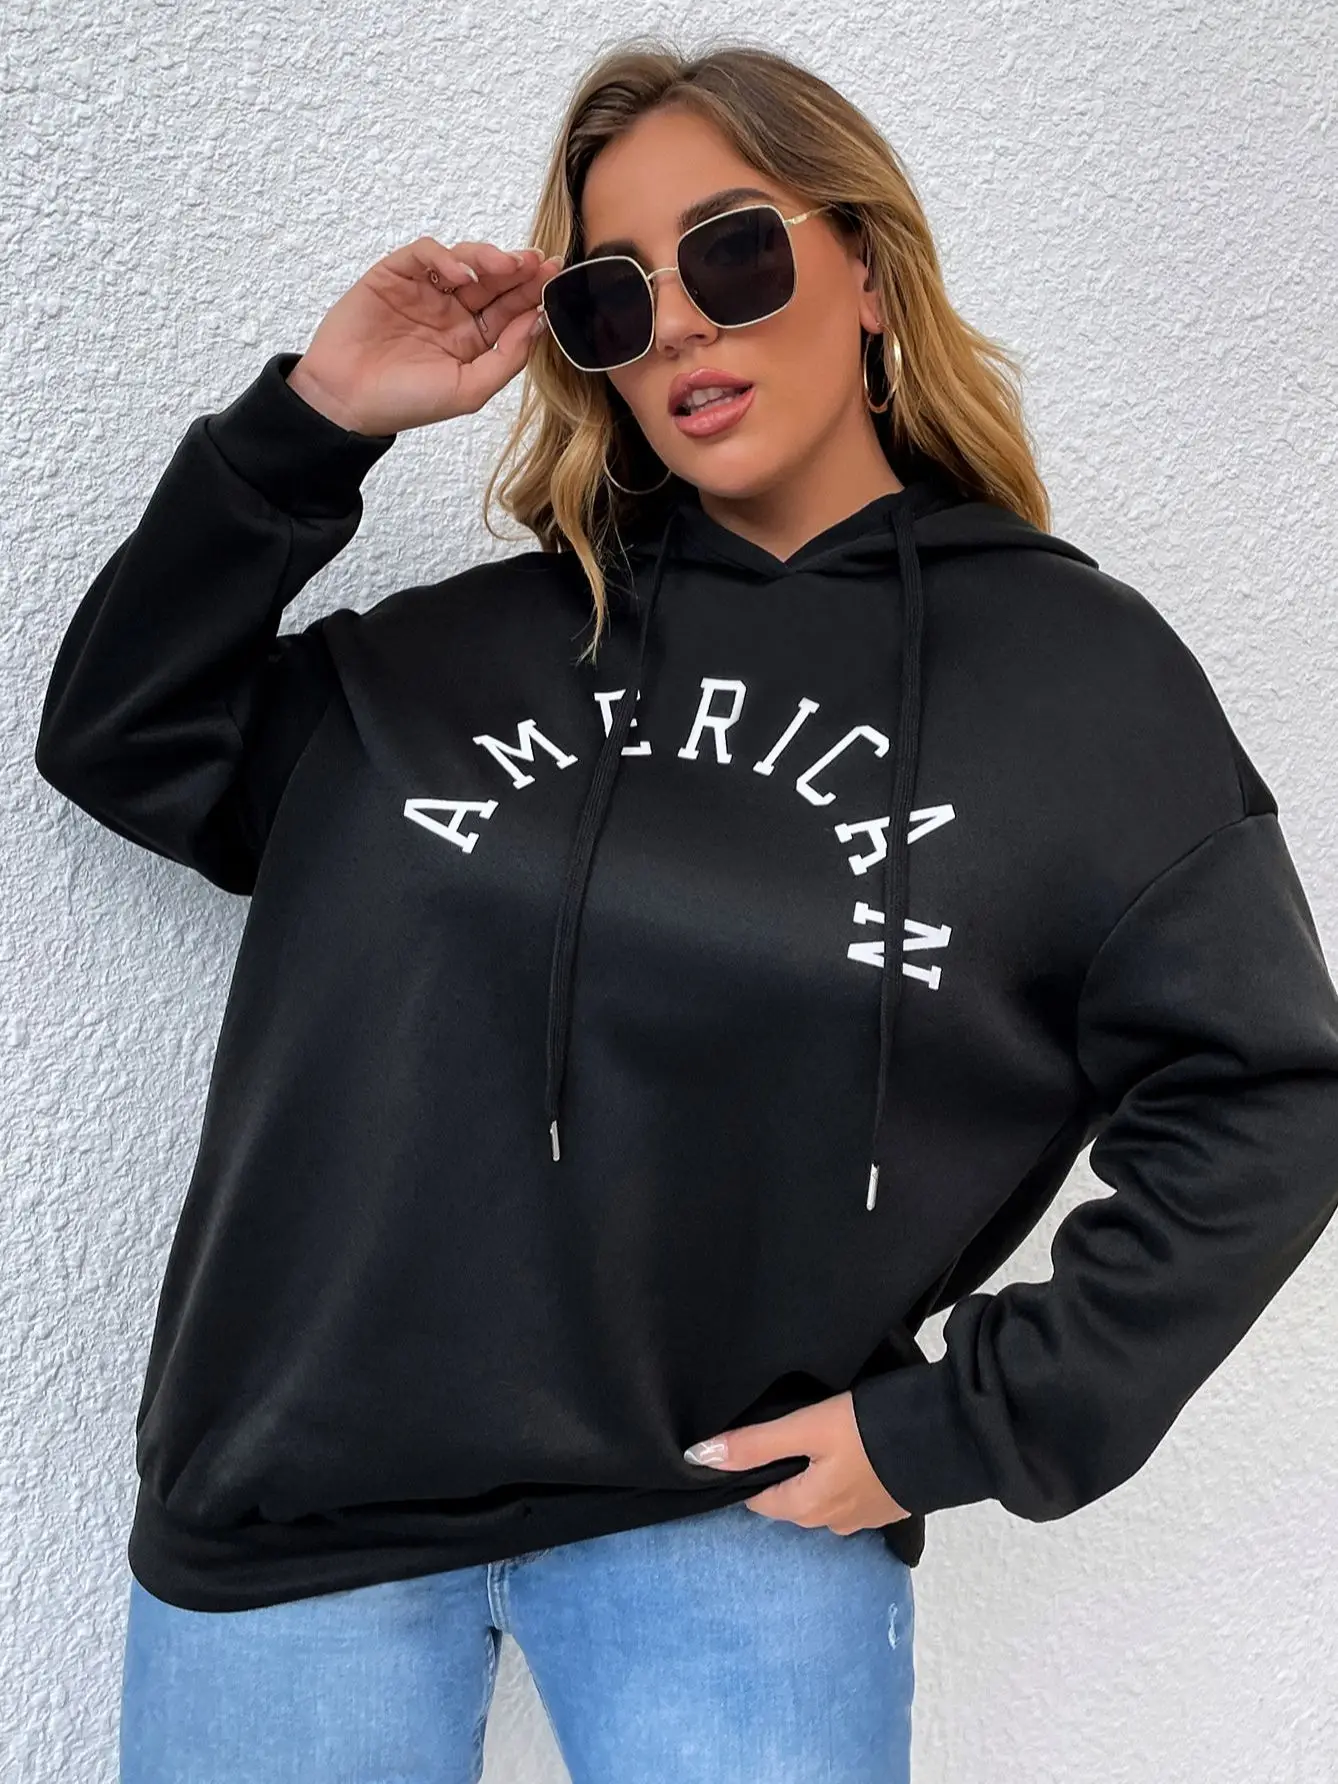 Plus Size Hooded Sweatshirts for Women Hoodie 4xl Ladies Autumn Winter 2022 Large Clothing Oversize Loose Pullovers Casual Top